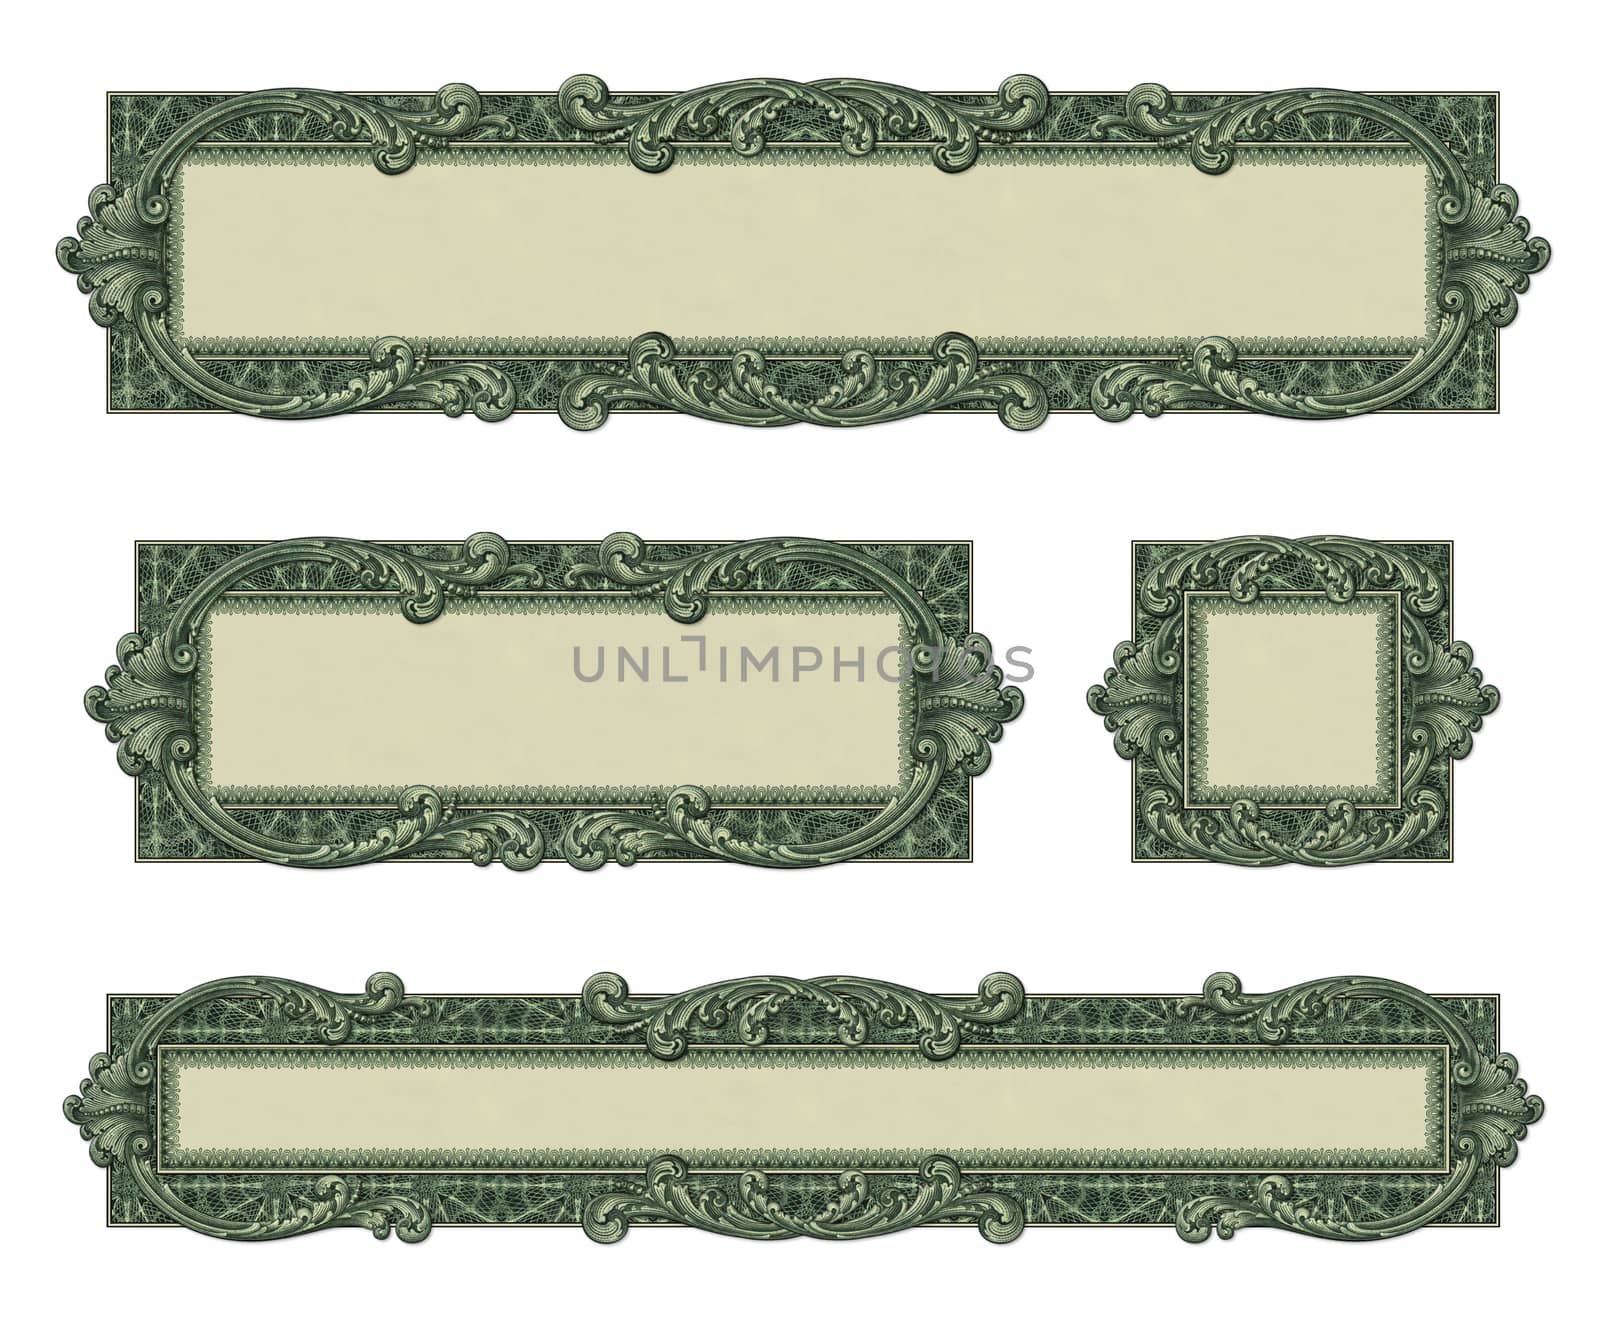 Photo-illustration of 4 borders/frames using elements from a dollar bill.